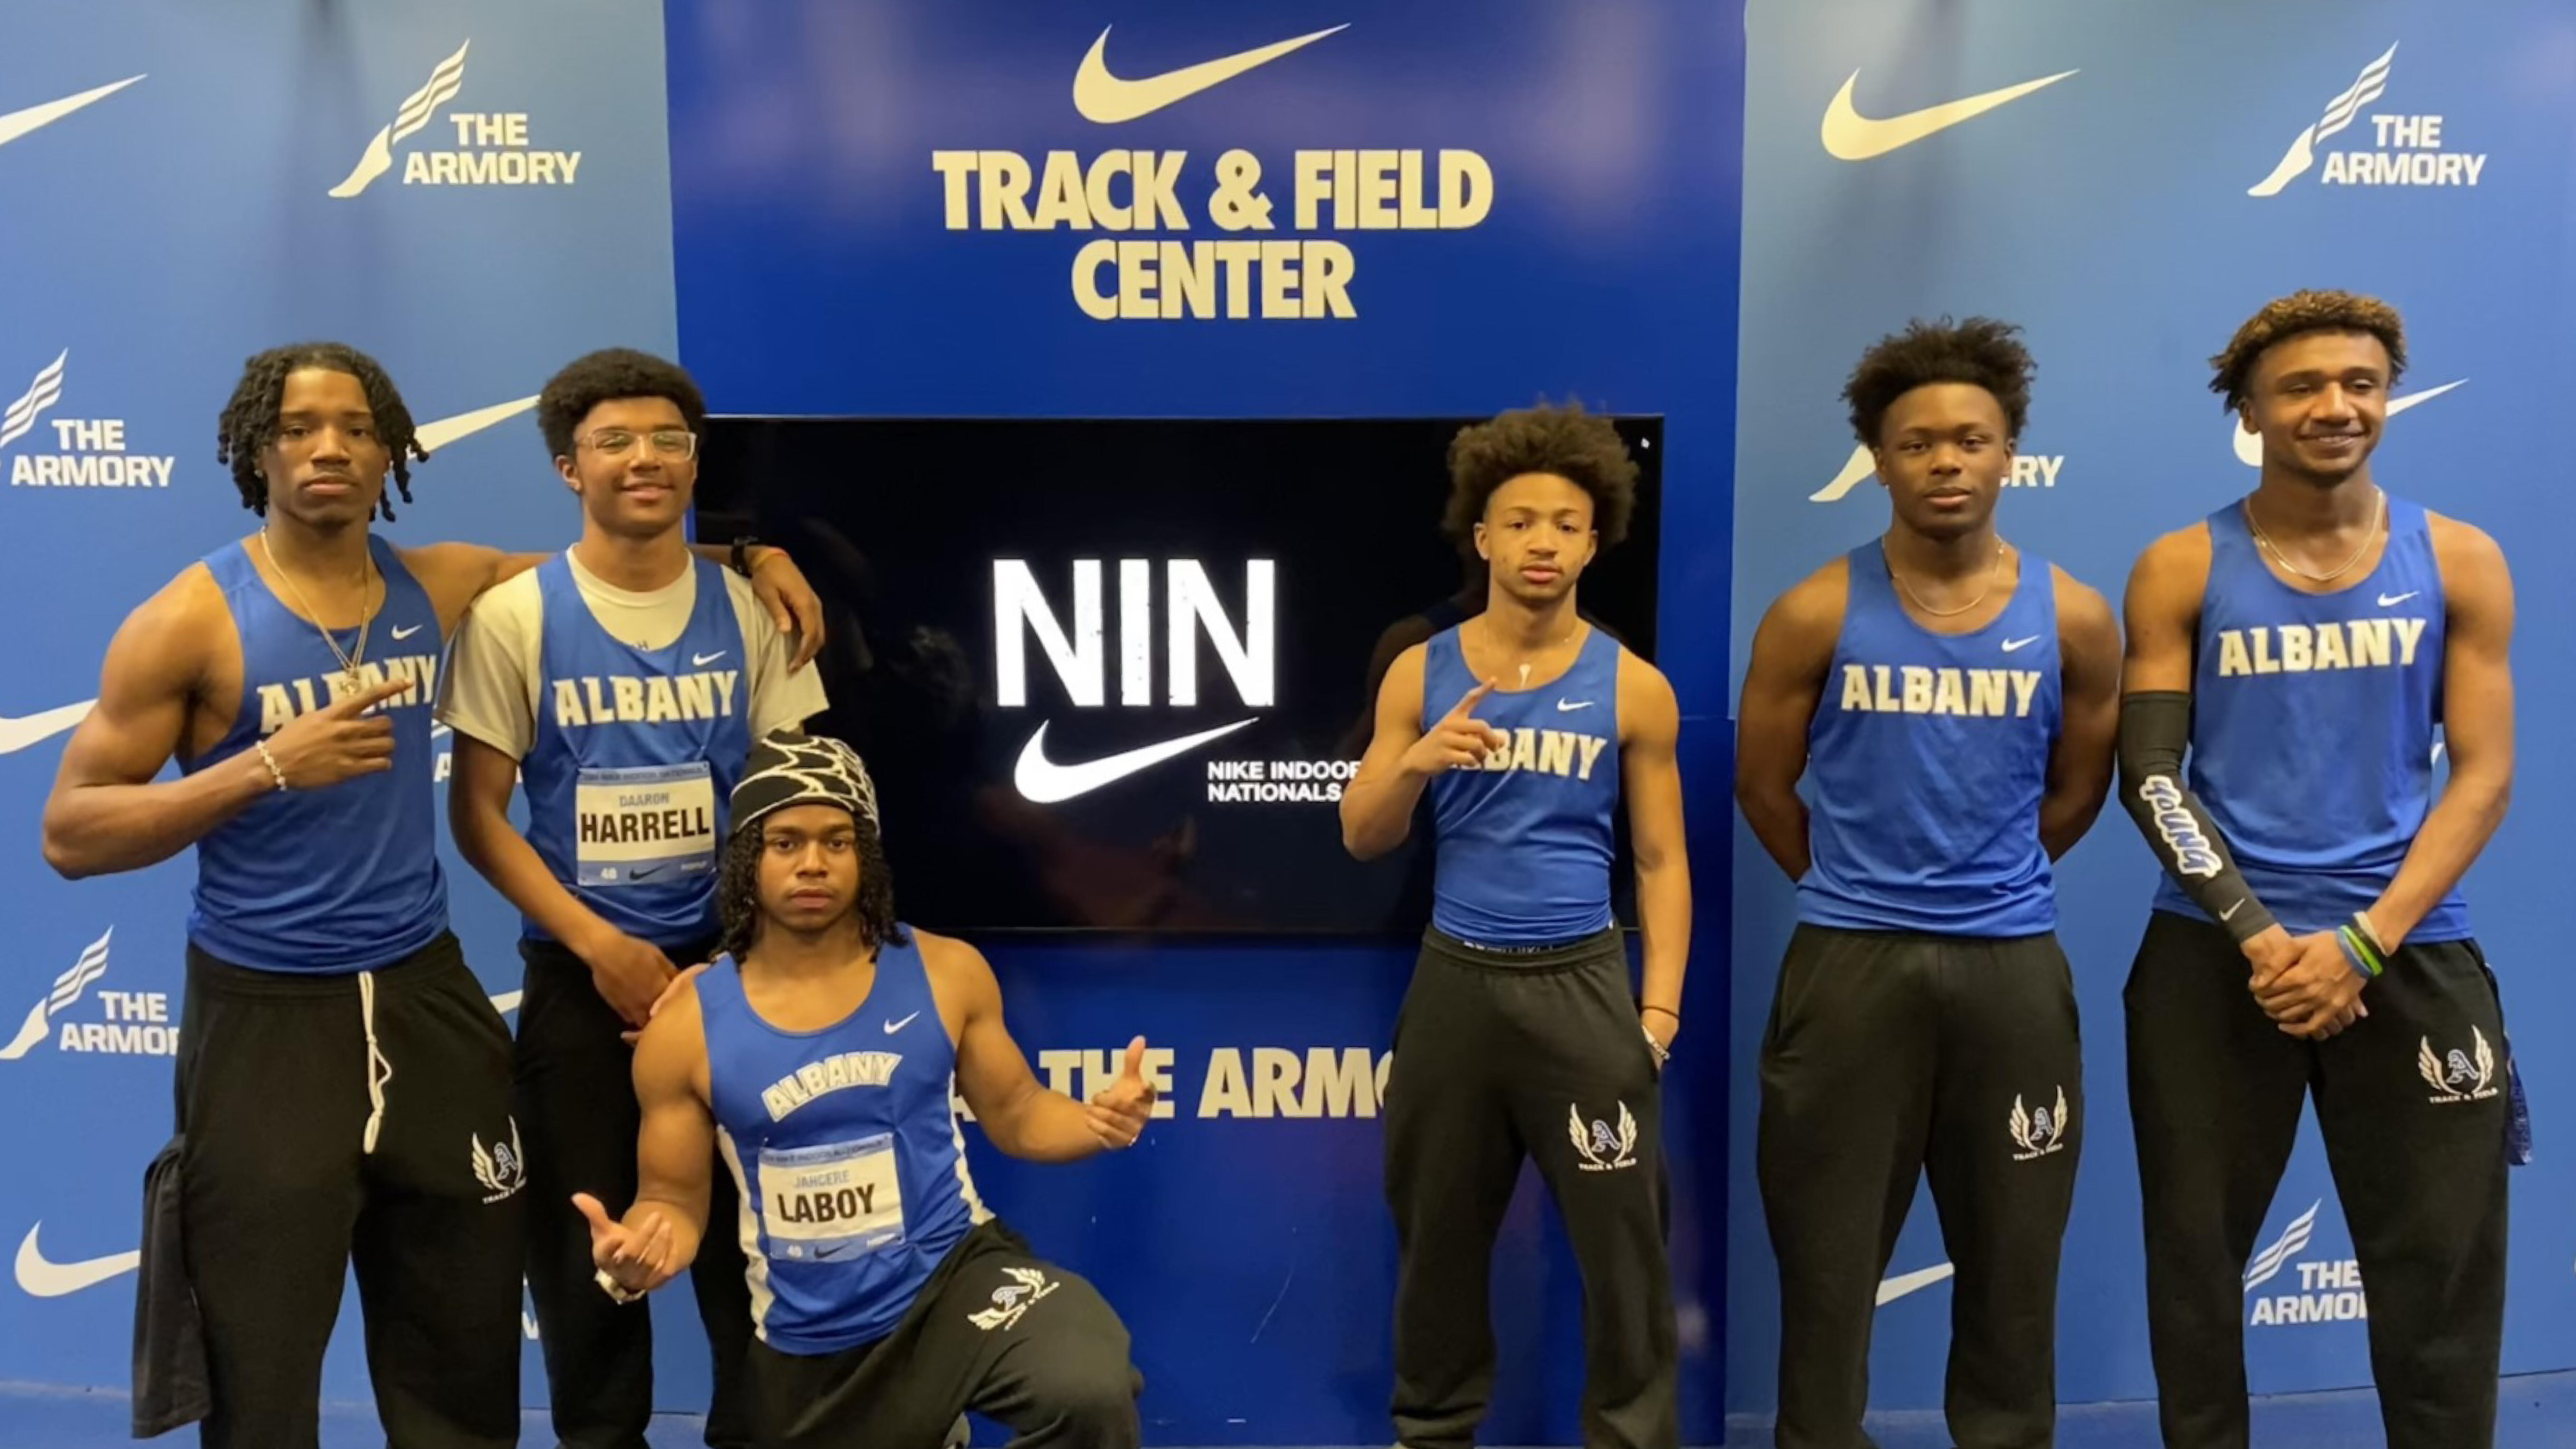 ʿ High track members posing for a photo in front of the Nike backdrop